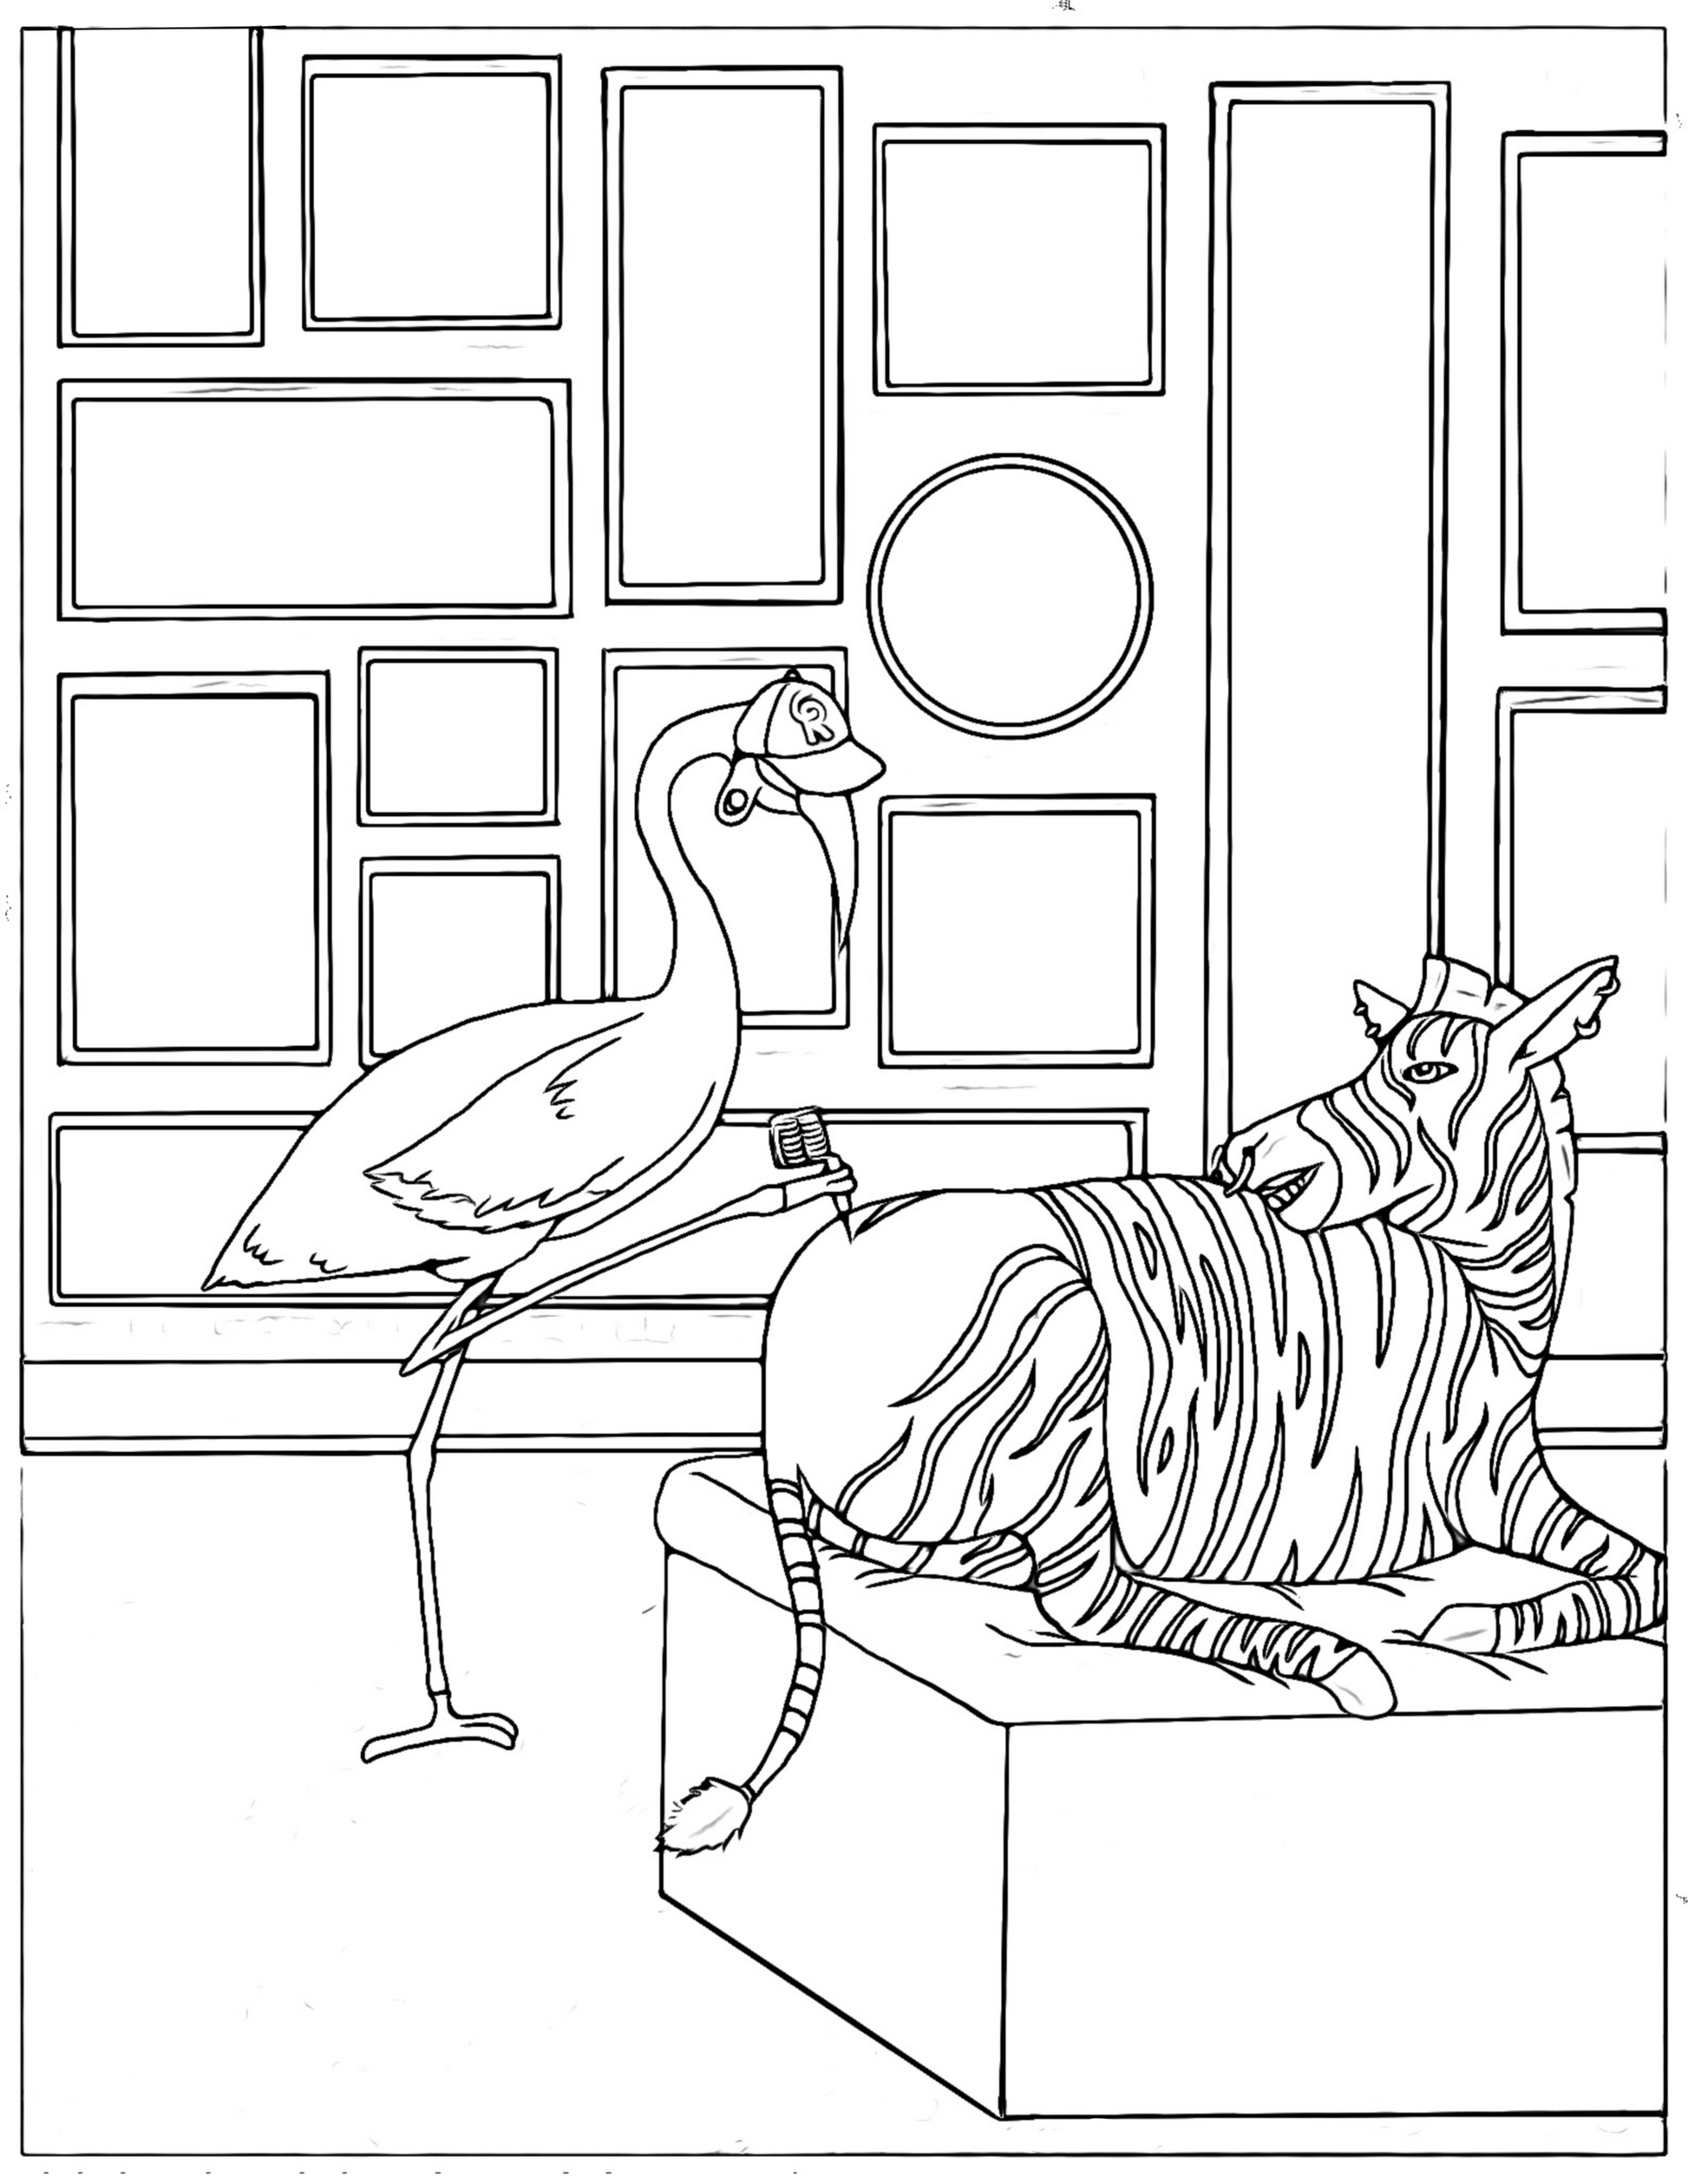 Fun Collection of Digital Cryptids and Animals Coloring Pages (12 pages) | Deviant Kreations - Deviantkreations - animals, Coloring Page, cryptid, Digital